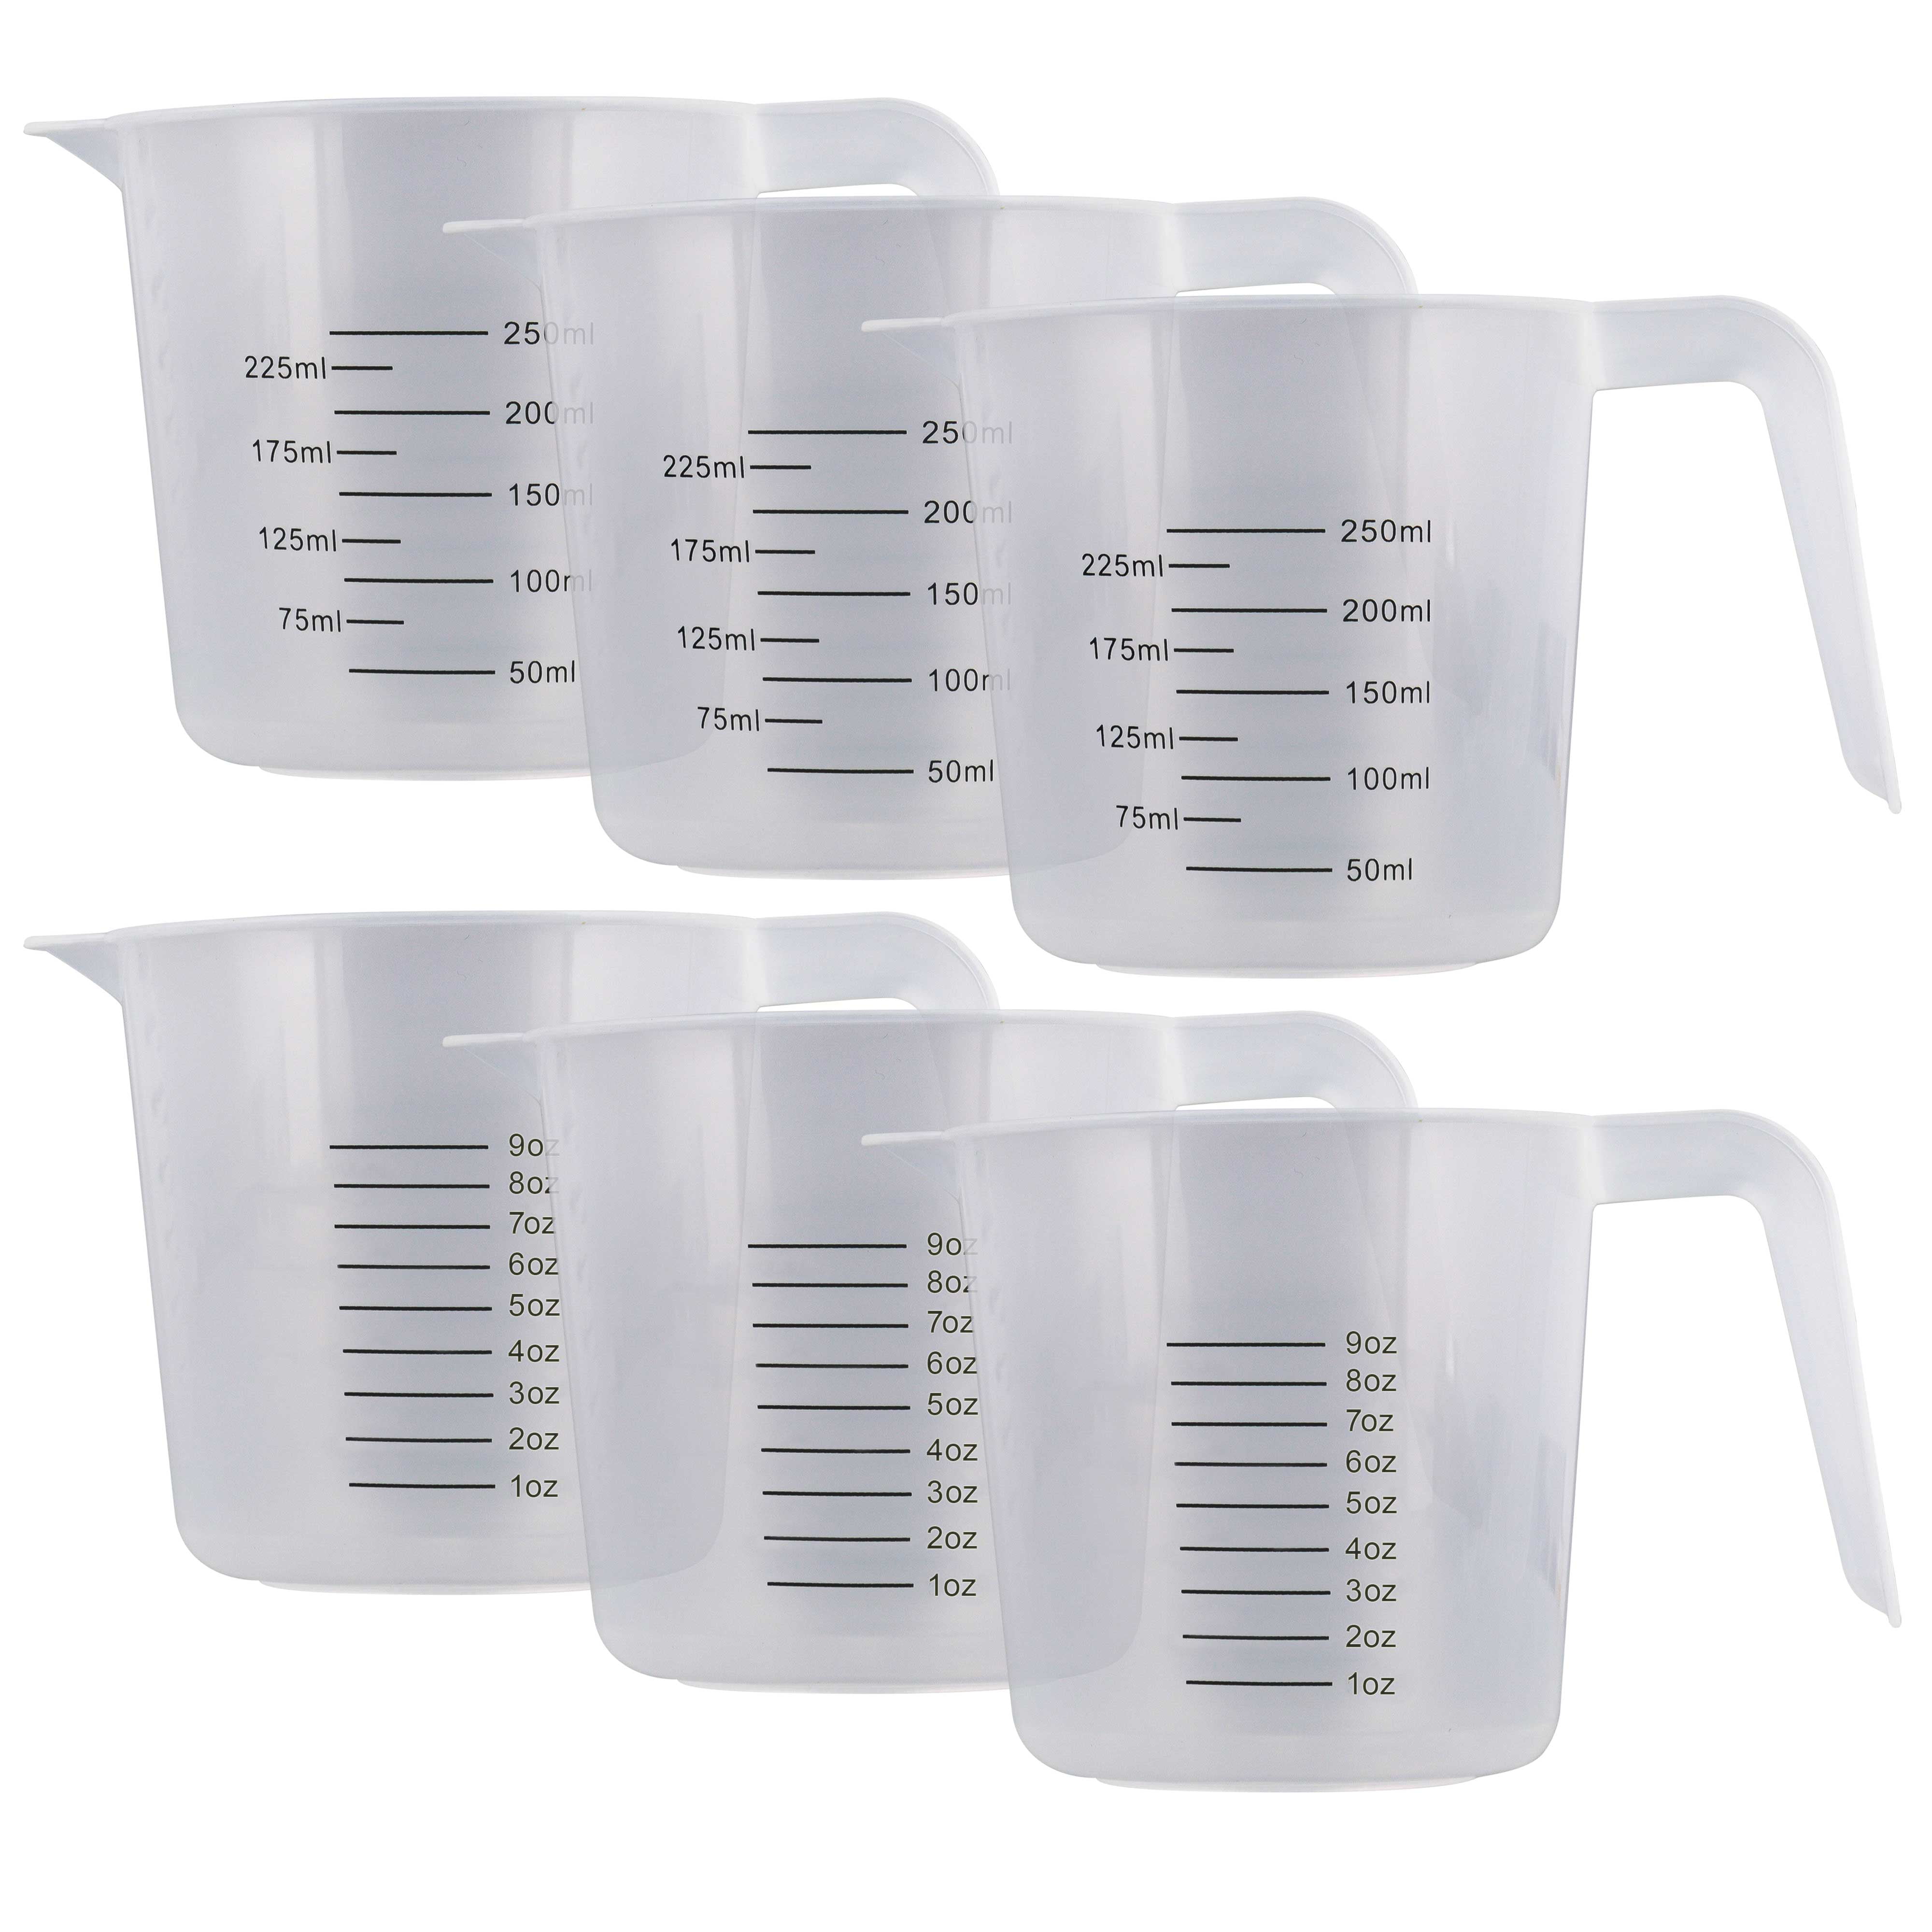 8oz (250 ml) Measuring Pitcher, Plastic, Multipurpose - Great for Chemicals, Oil, Pool and Lawn - Ounce (oz) and Milliliter (ML) Increments (1 Cup)